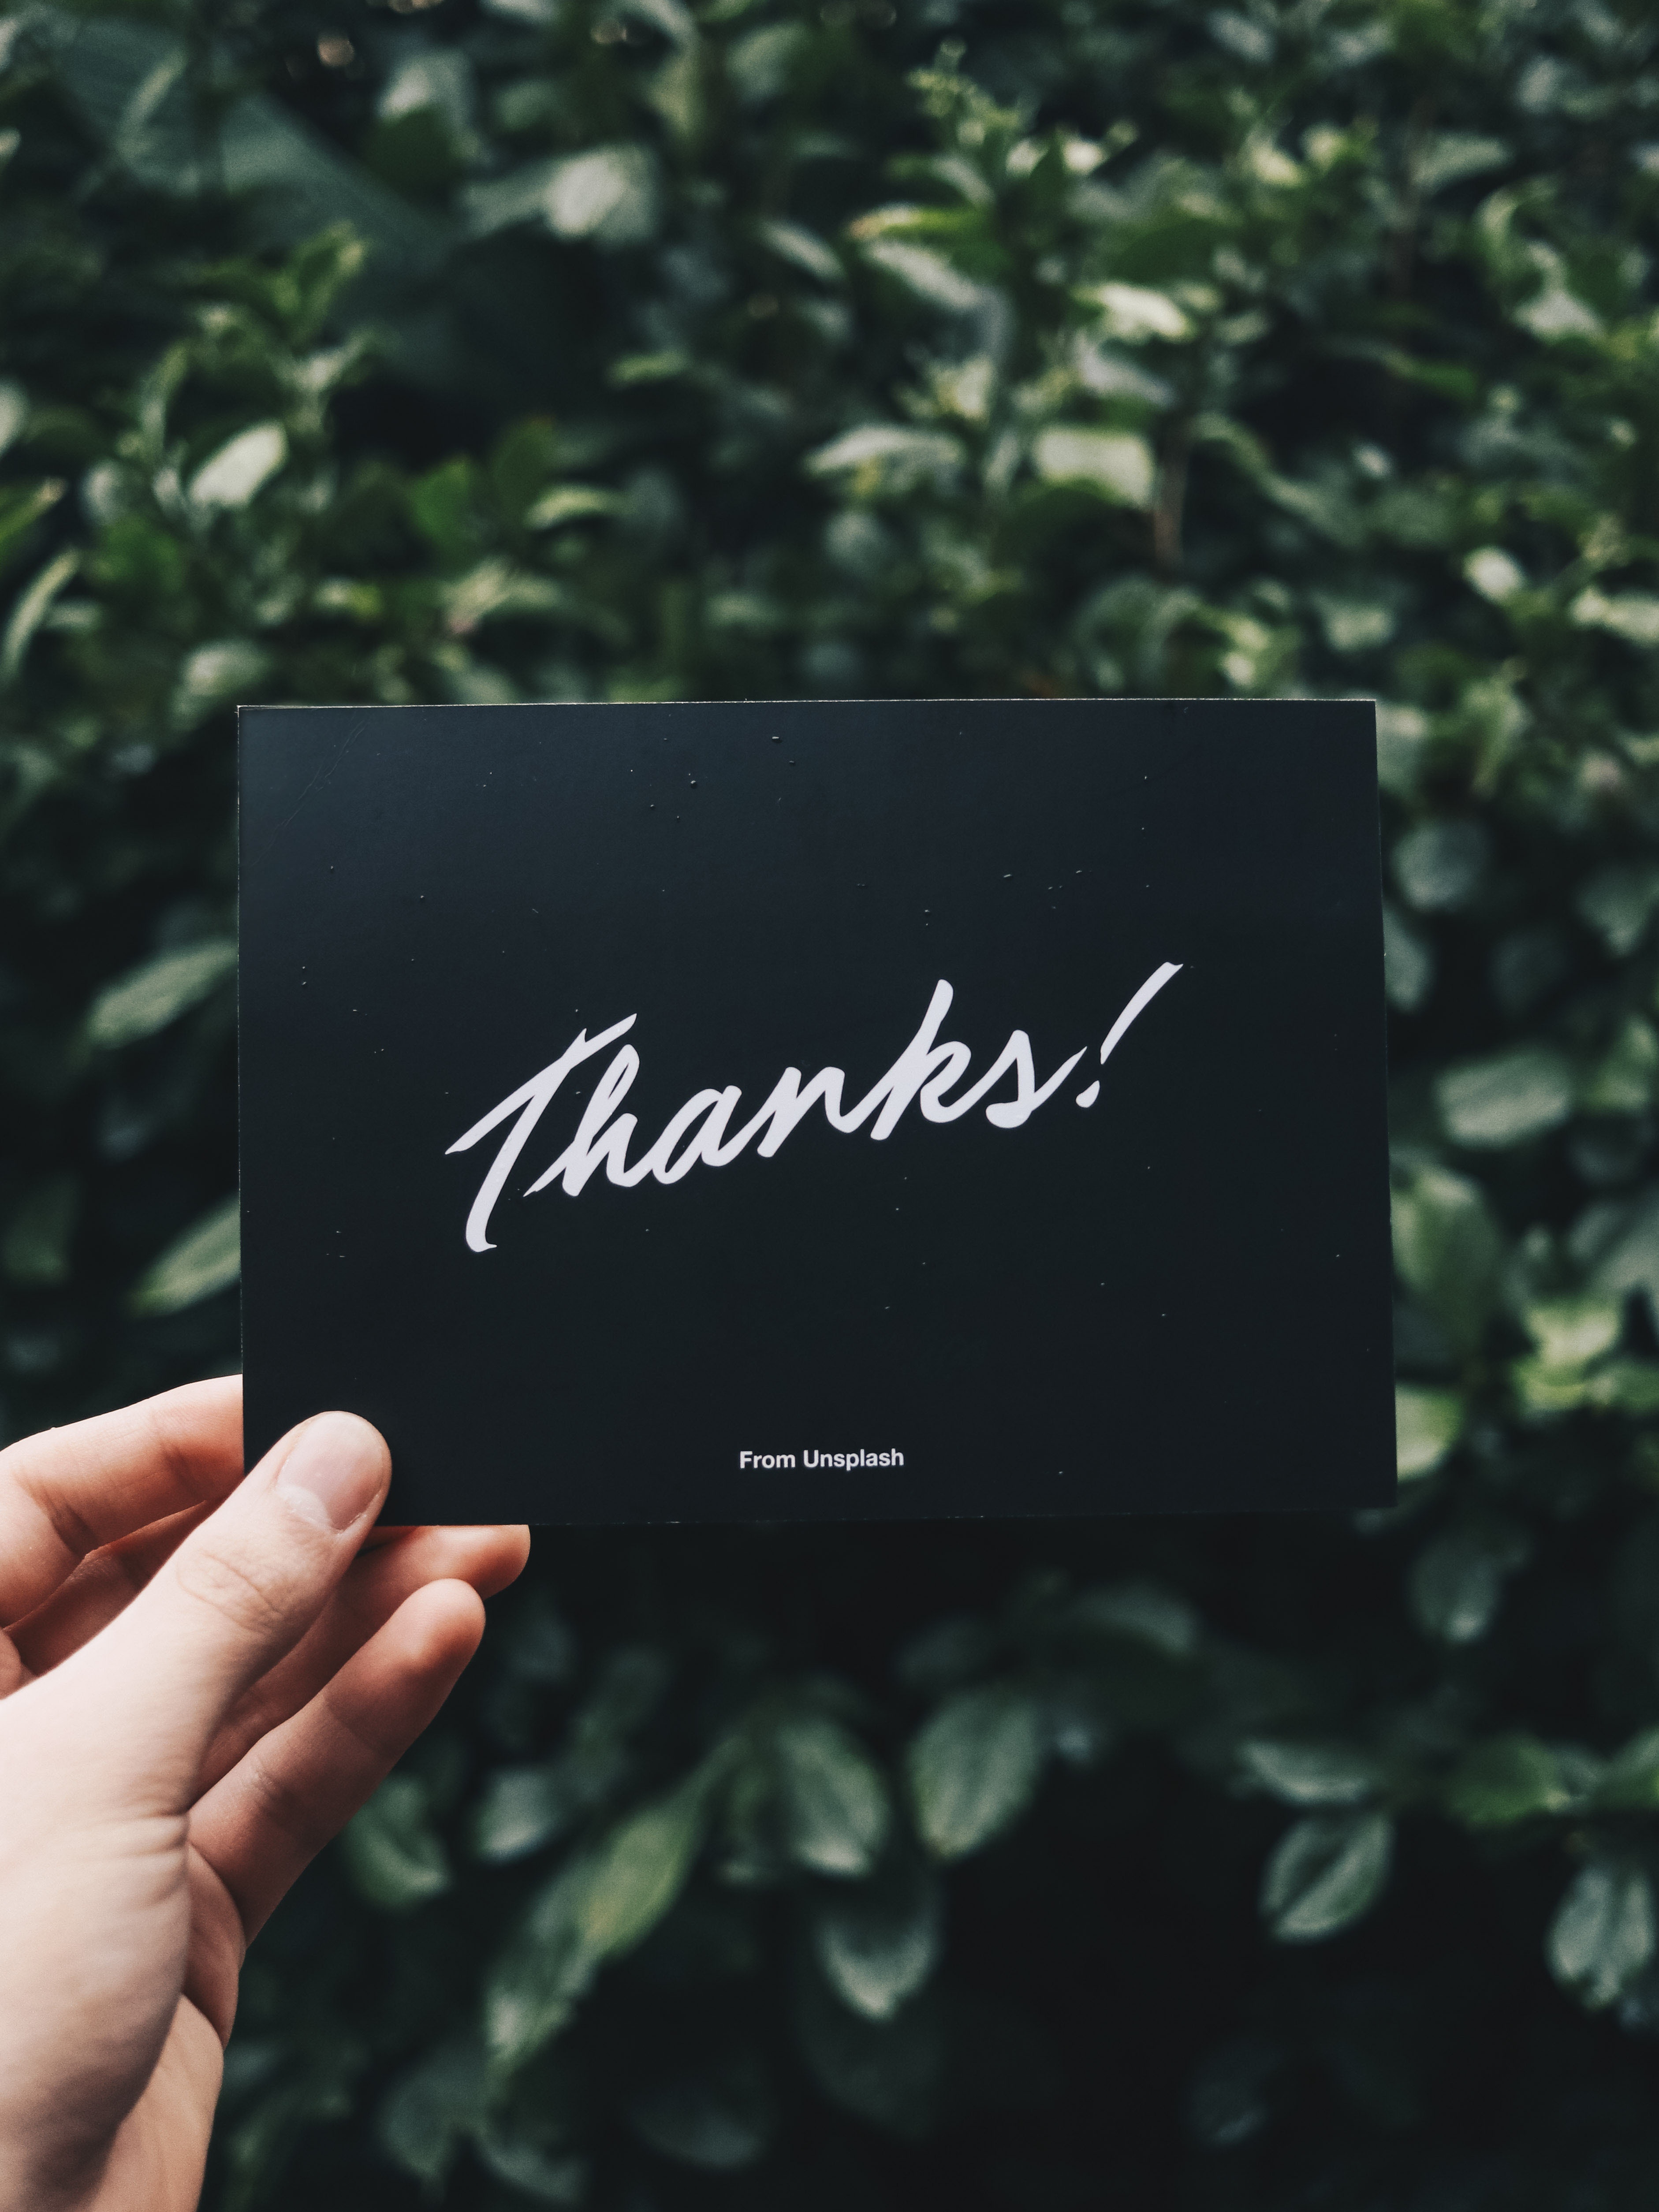 hand holding greeting card that says "Thanks!"